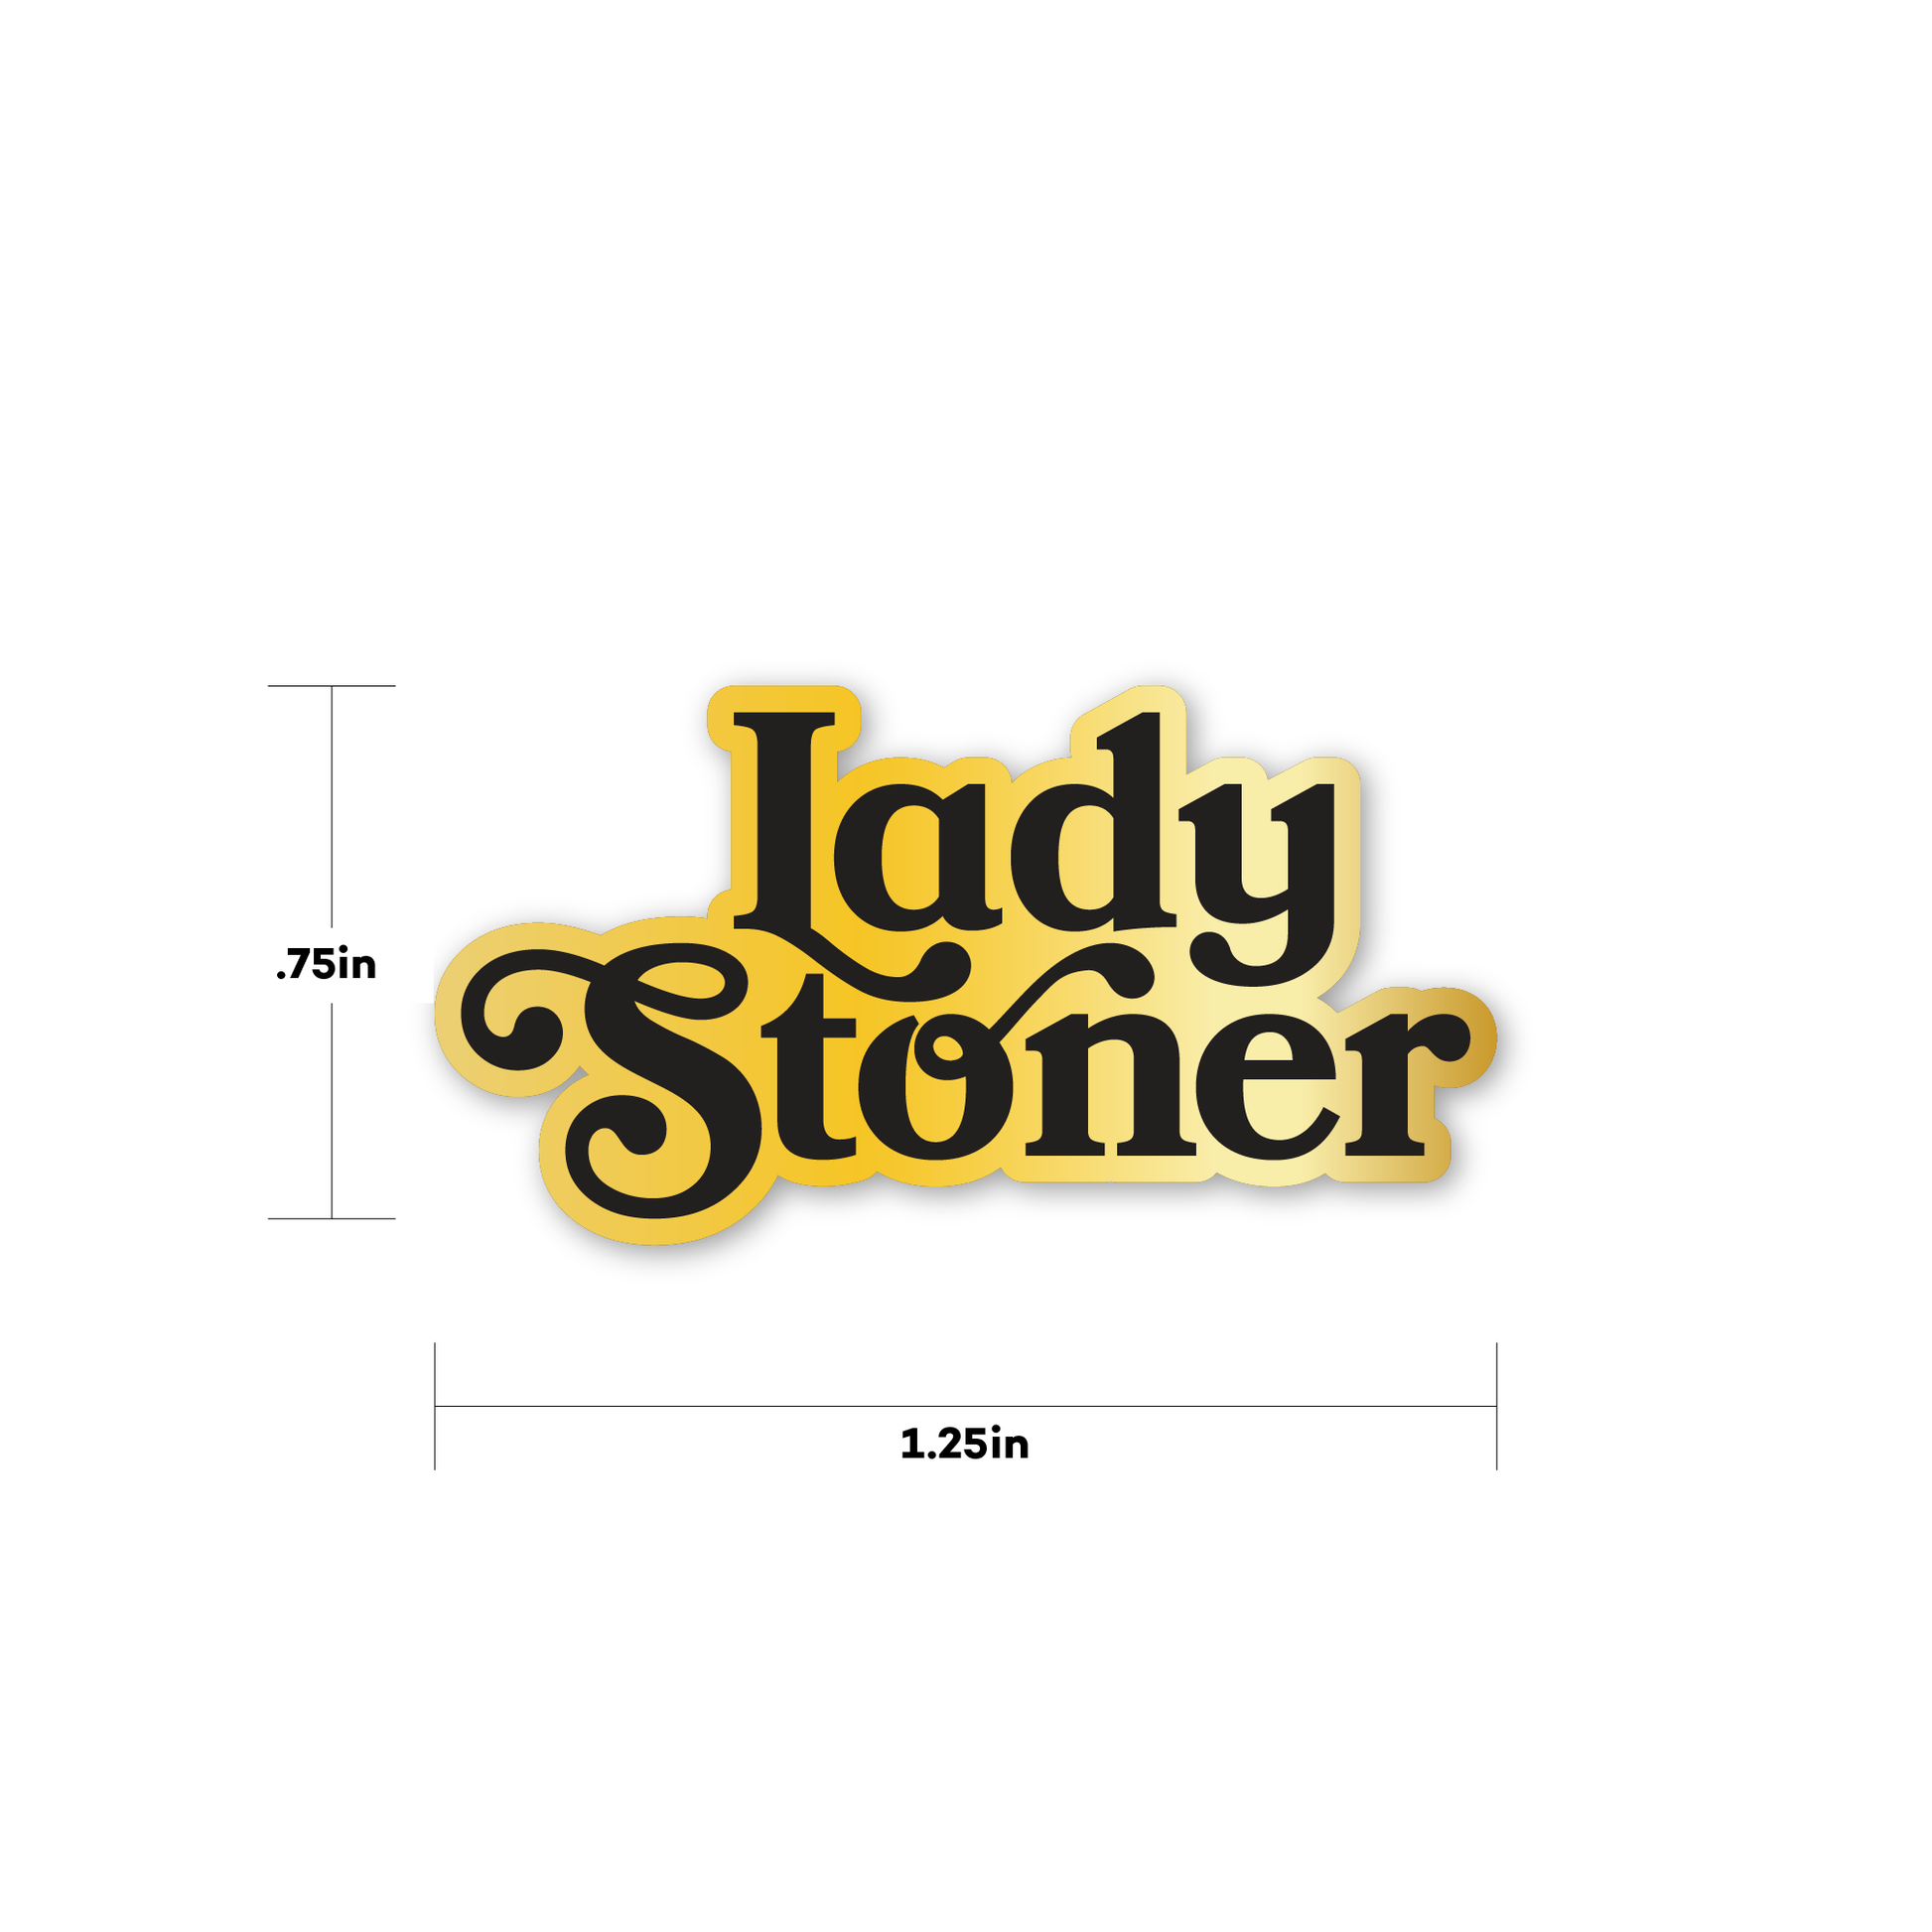 .75 in  by 1.25 in gold lady stoner enamel pin by fntsma